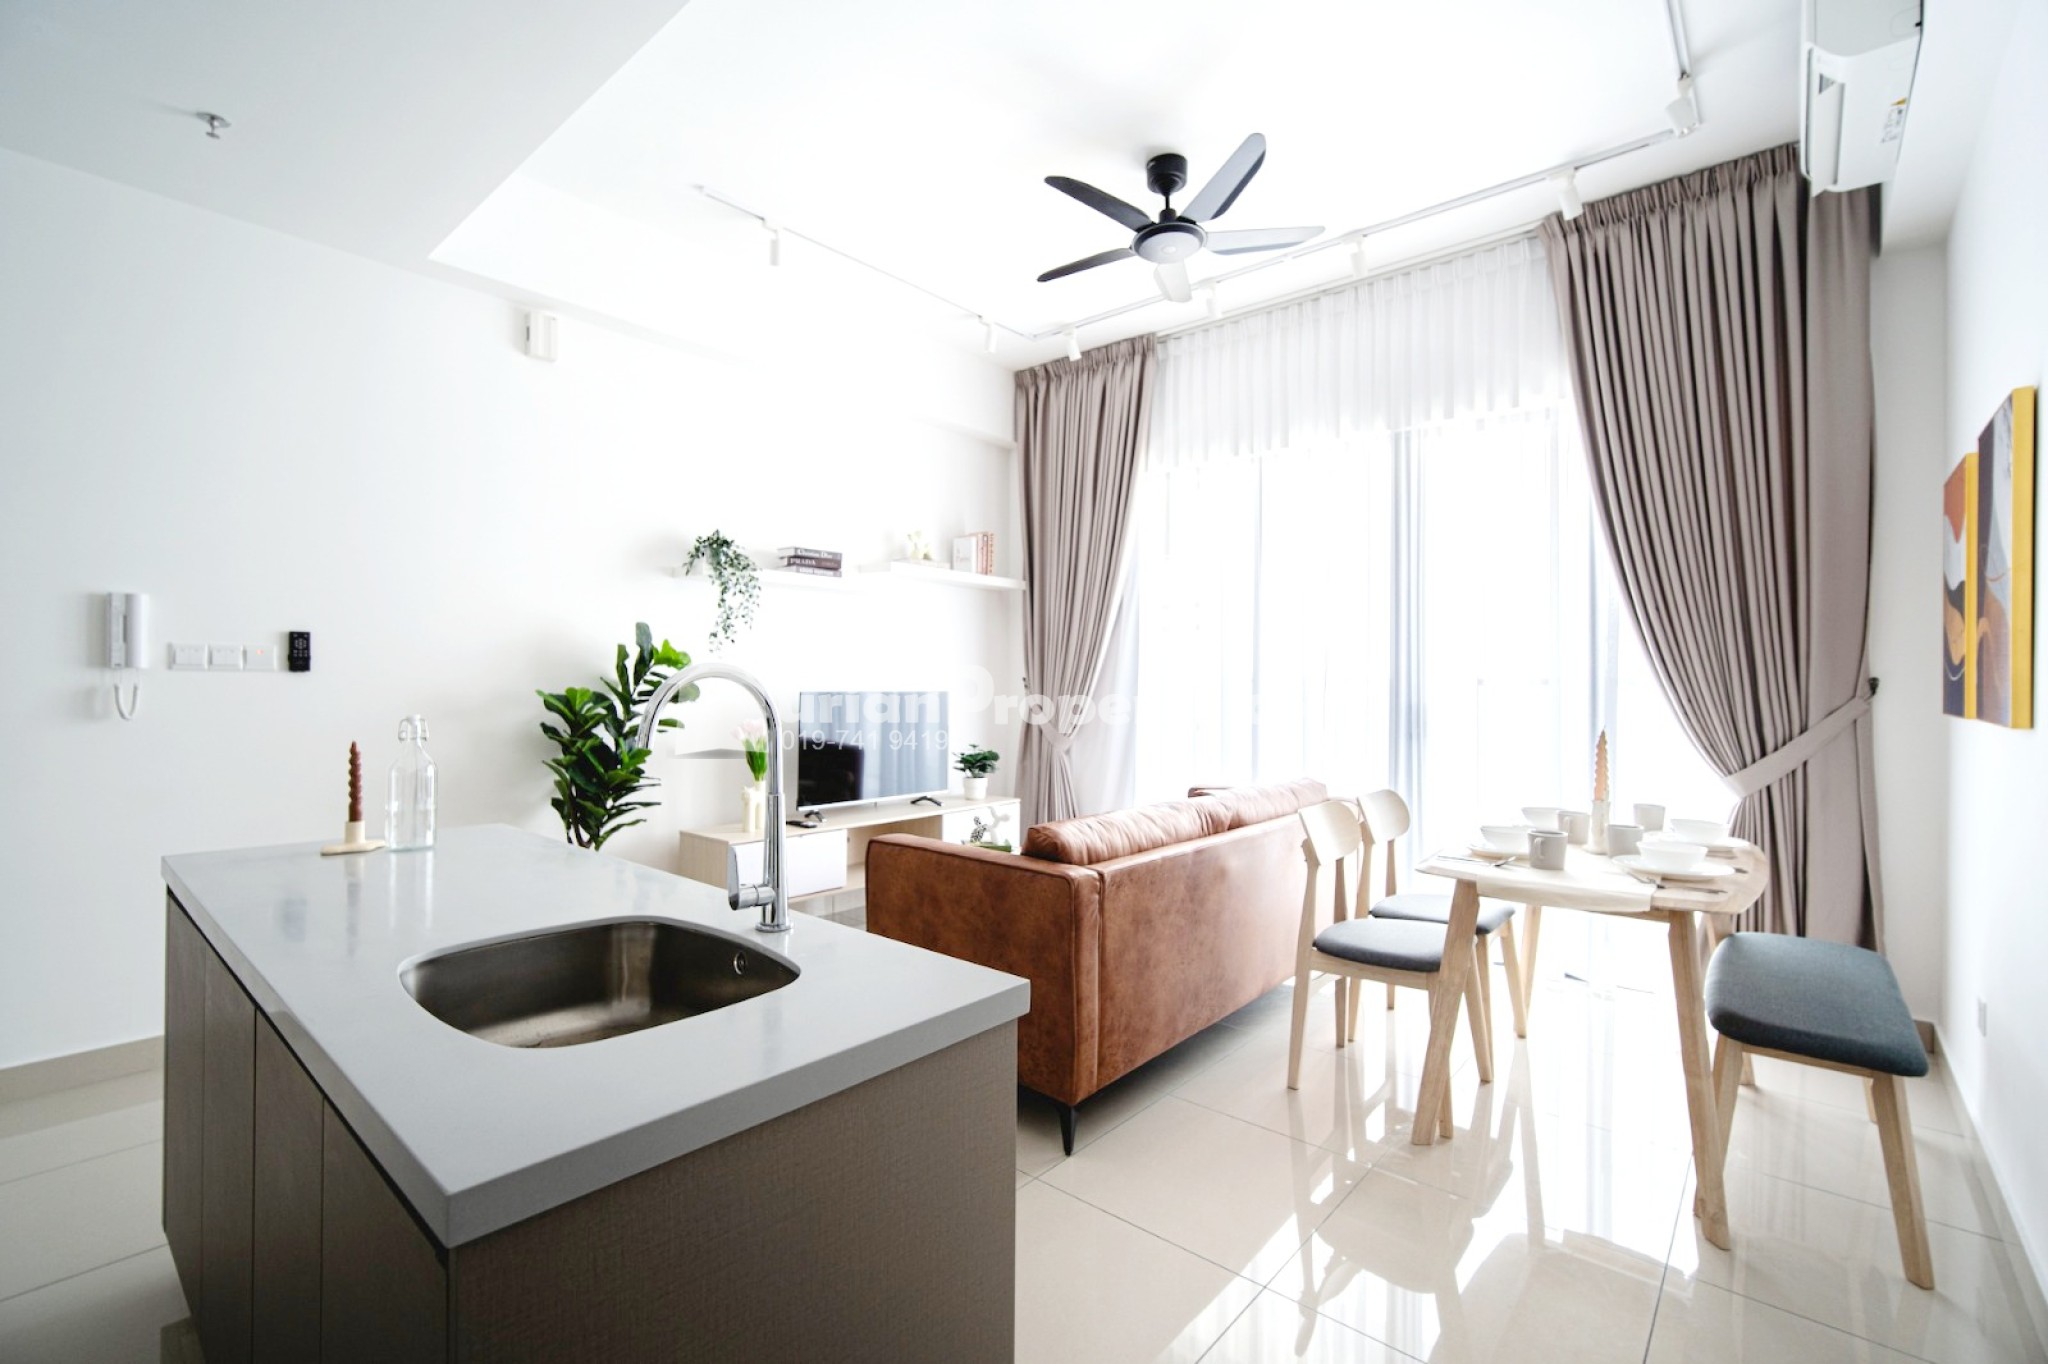 Condo For Rent at Trion KL